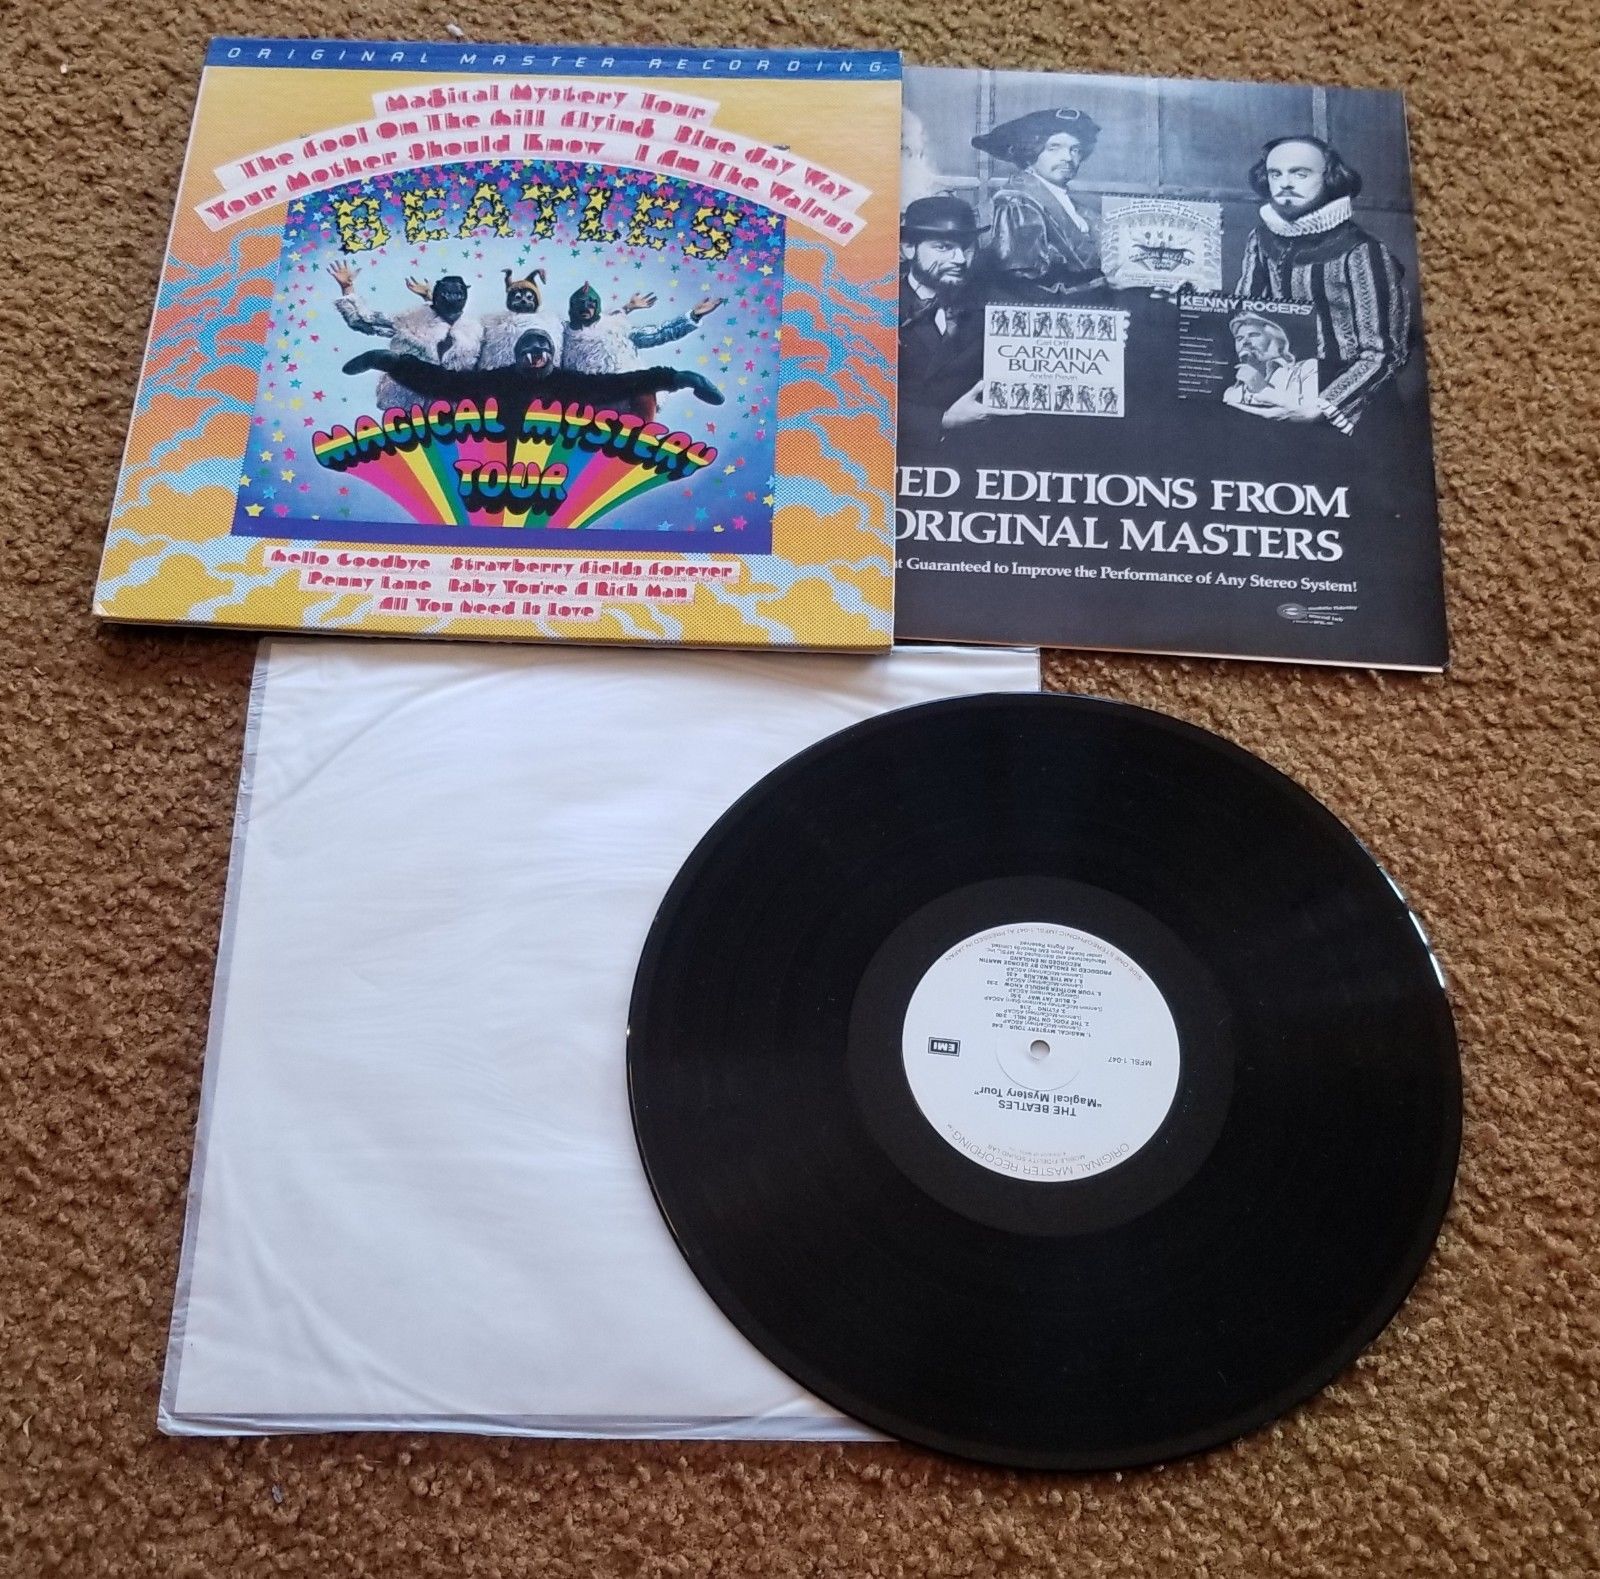 The Beatles “Magical Mystery Tour" 1981 USA MFSL  and Revolver EAS-80556 Japan